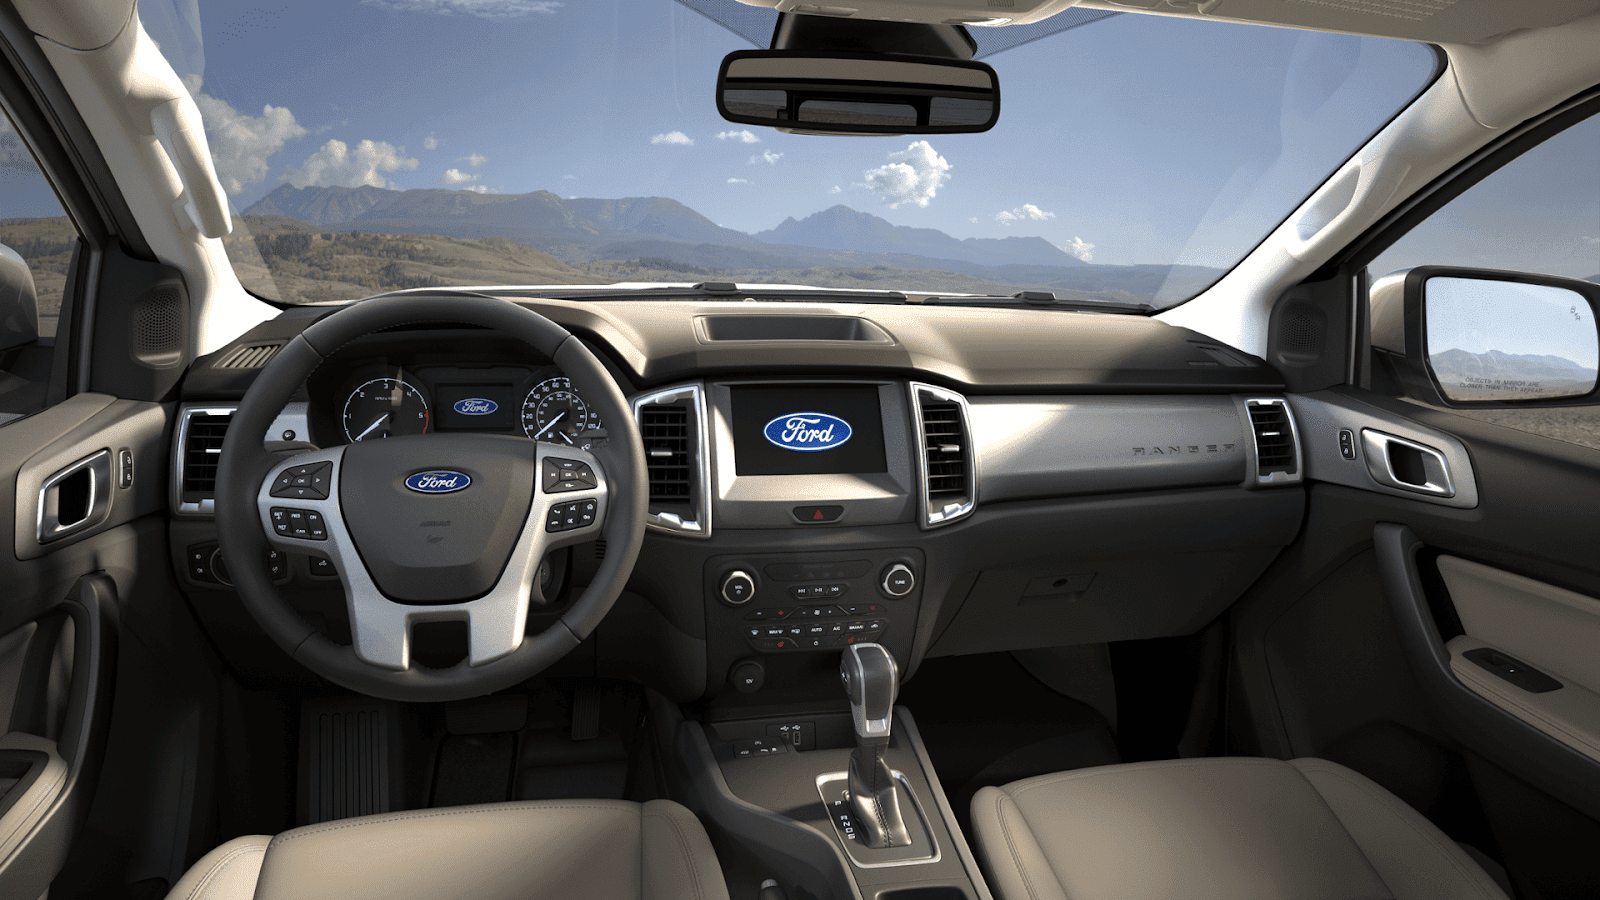 Goldilocks And The One Pickup Truck The 2019 Ford Ranger